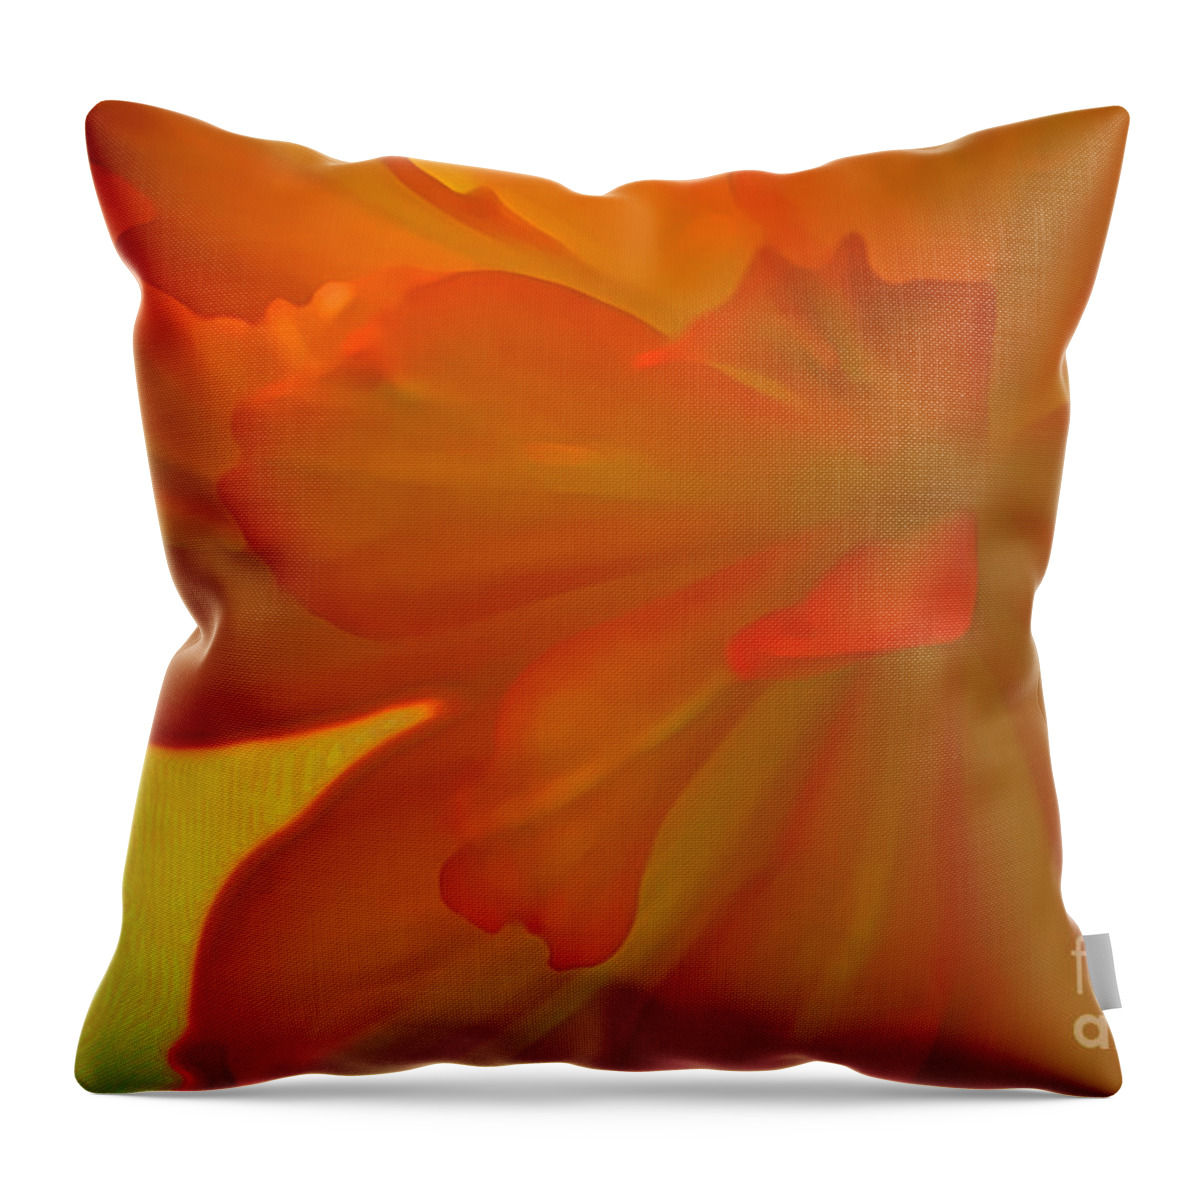 Flower Throw Pillow featuring the photograph Sweet Nectar by Julie Lueders 